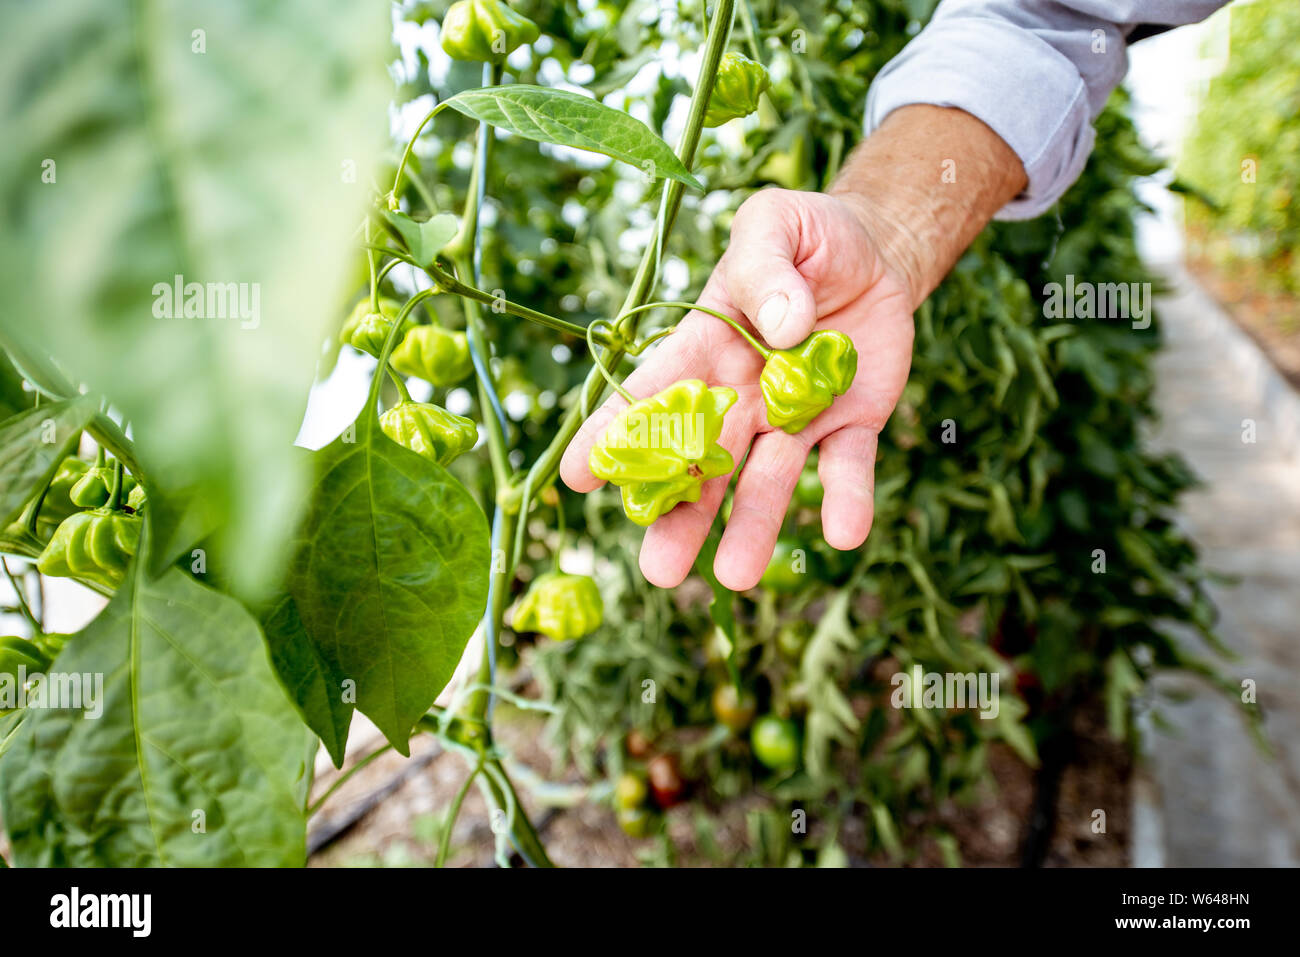 Organic plantation with growing star shaped green peppers, ready to harvest, close-up view Stock Photo